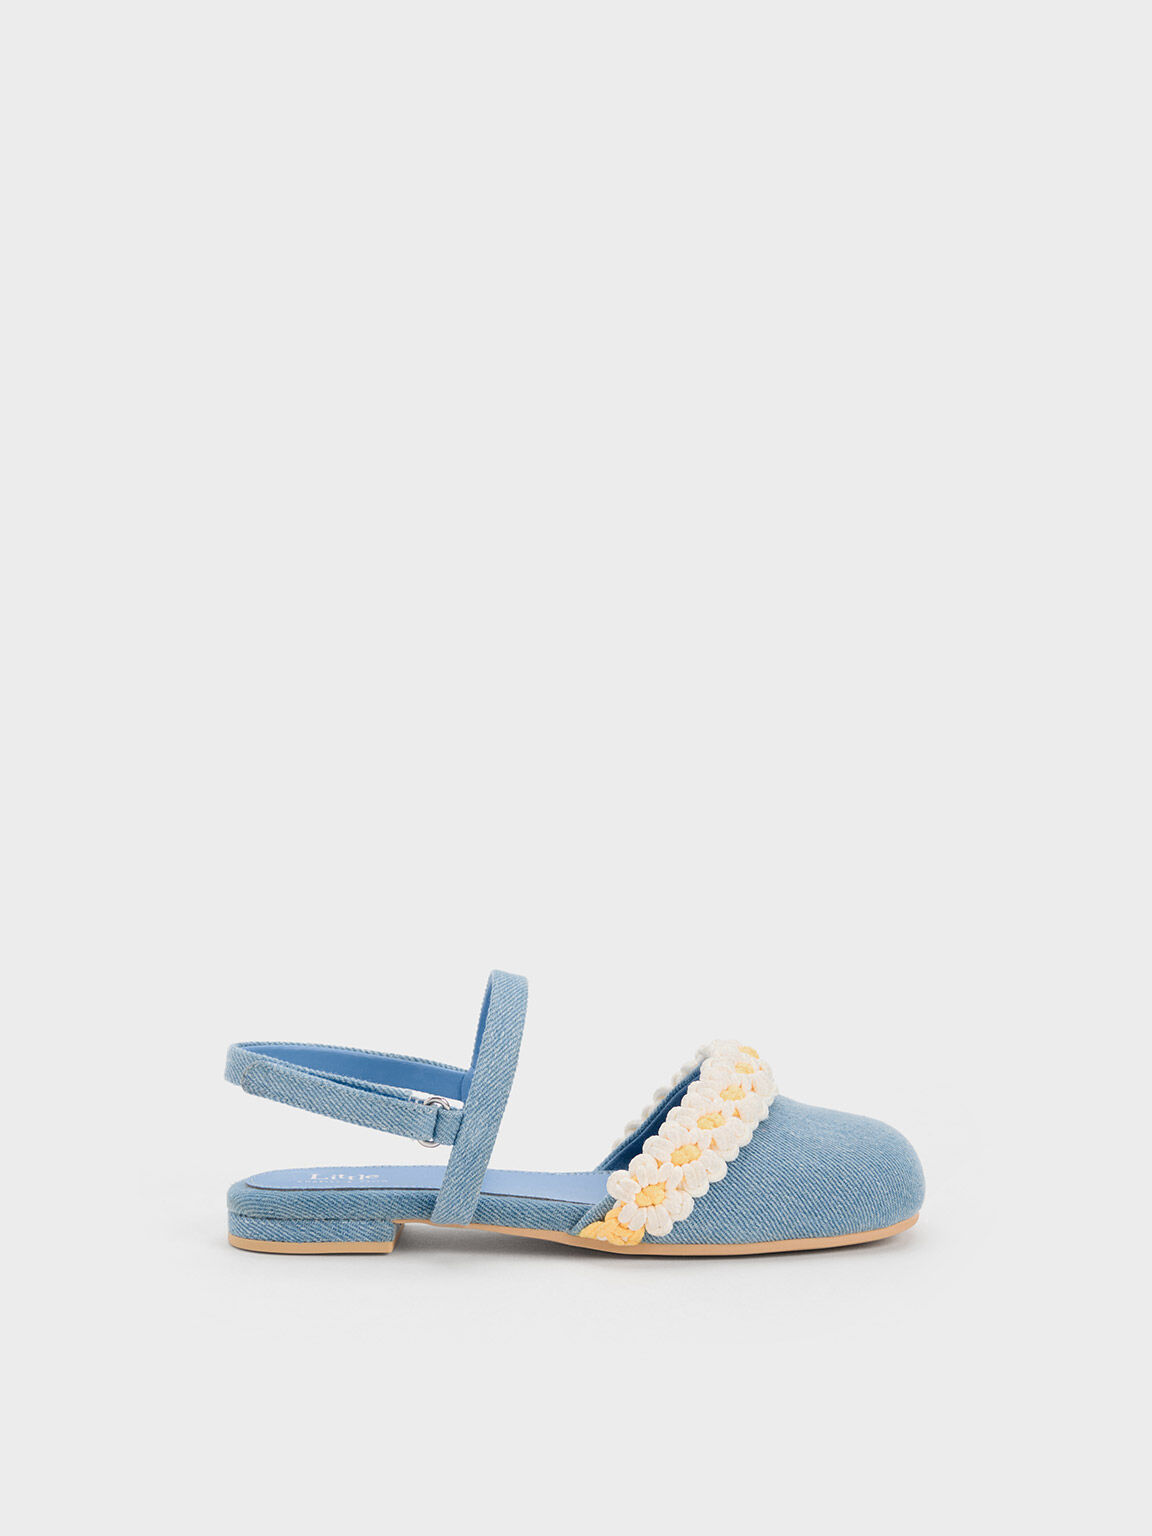 Shoes | Kids' Collection | CHARLES KEITH US